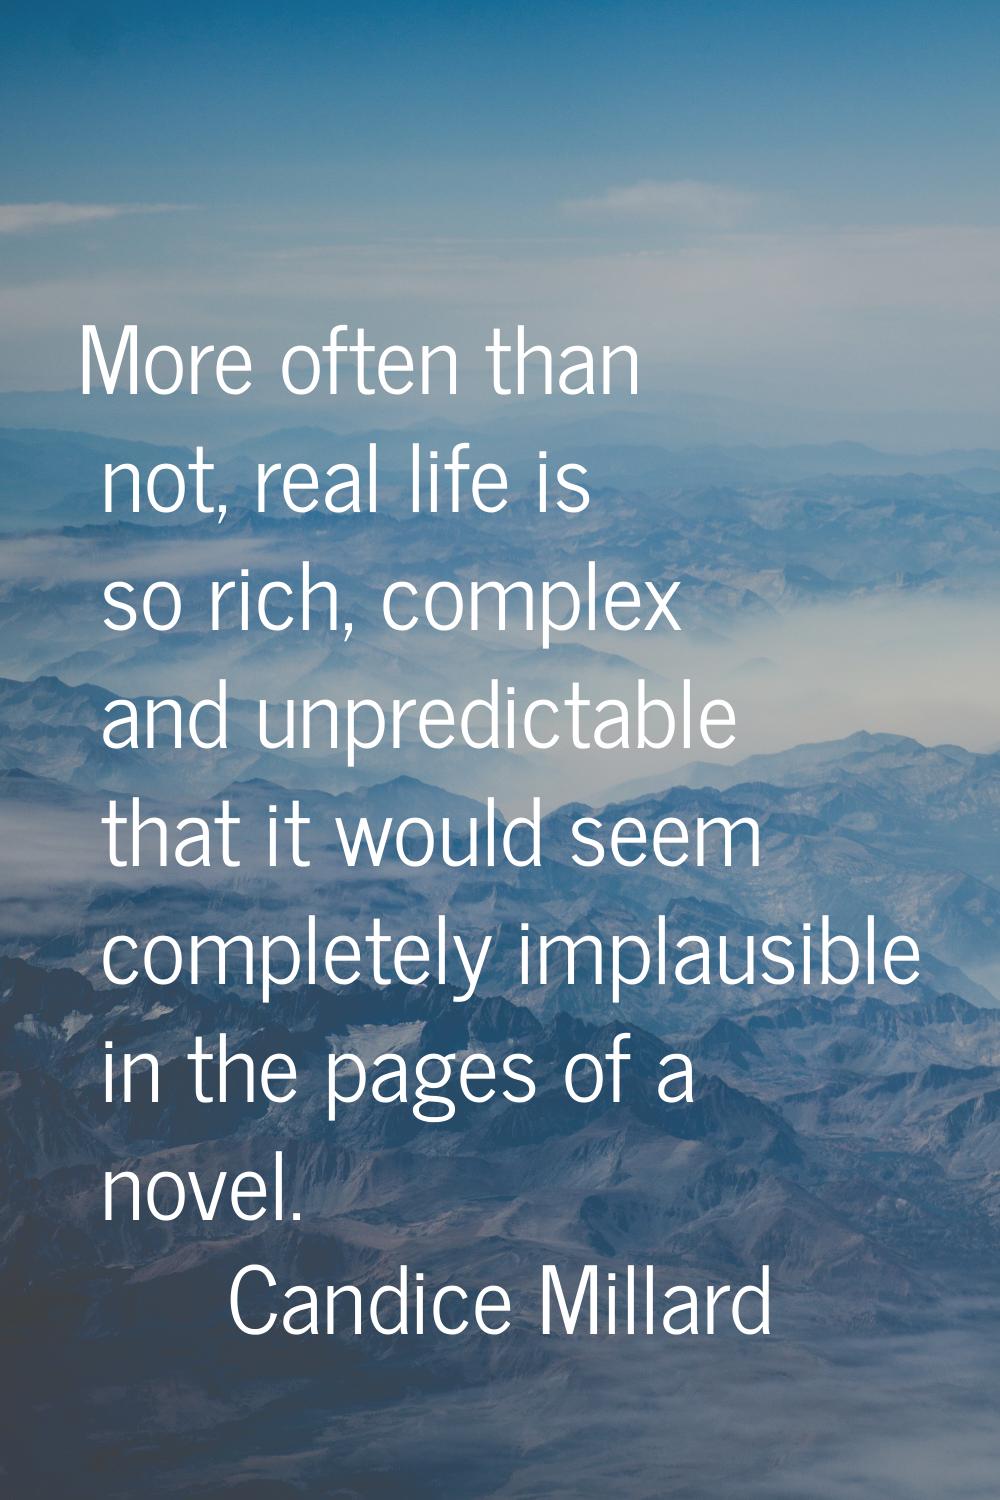 More often than not, real life is so rich, complex and unpredictable that it would seem completely 